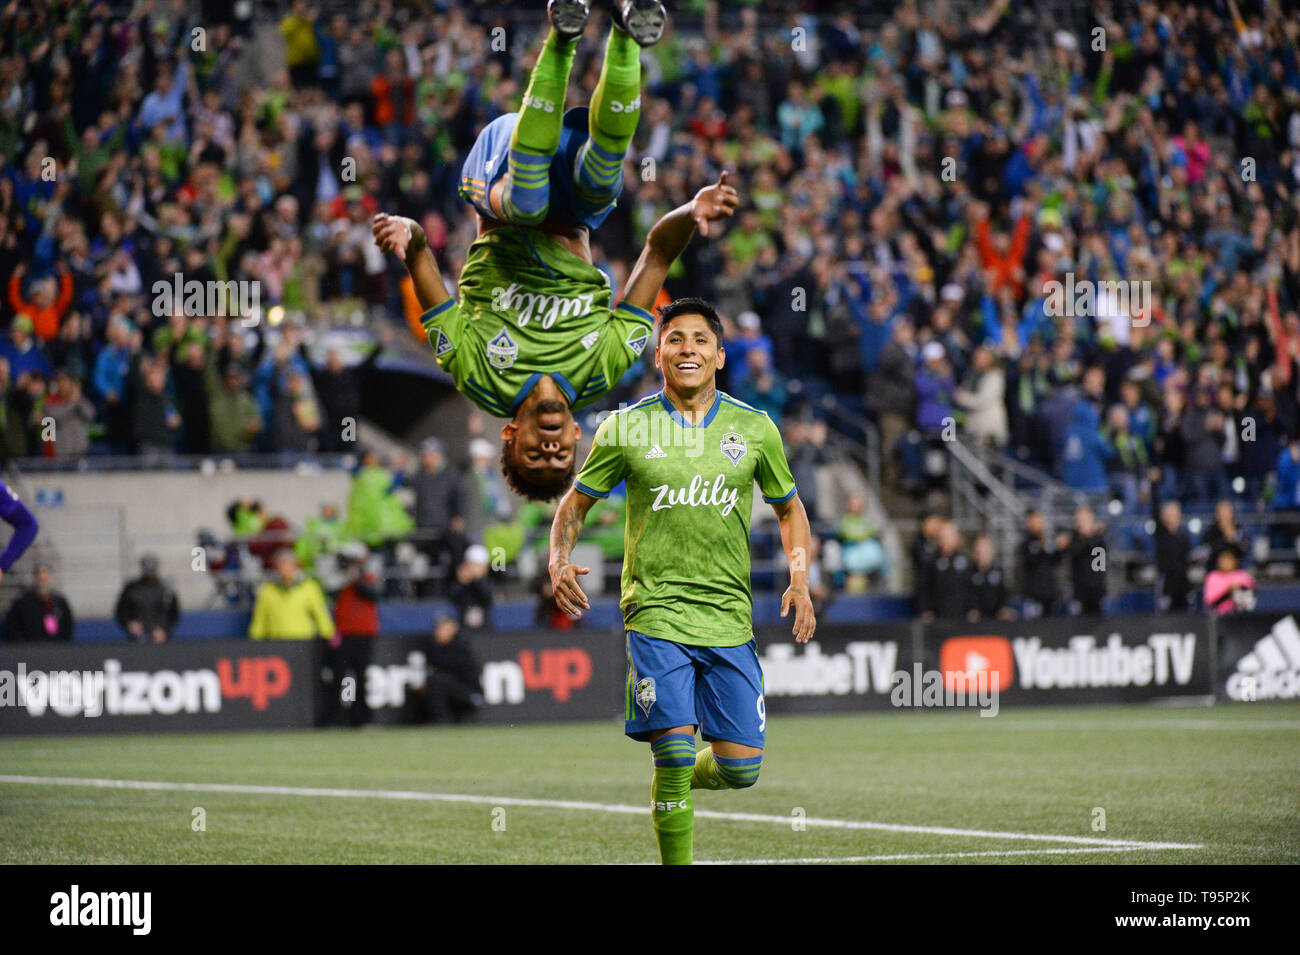 Seattle, Washington, USA. 15th May, 2019. The Sounders Raul Ruidiaz (9) looks on as Bwana (70) celebrates his goal with a flip. Orlando City visited the Seattle Sounders for an MLS match at Century Link Field in Seattle, WA. Seattle won the match 2-1. Credit: Jeff Halstead/ZUMA Wire/Alamy Live News Stock Photo